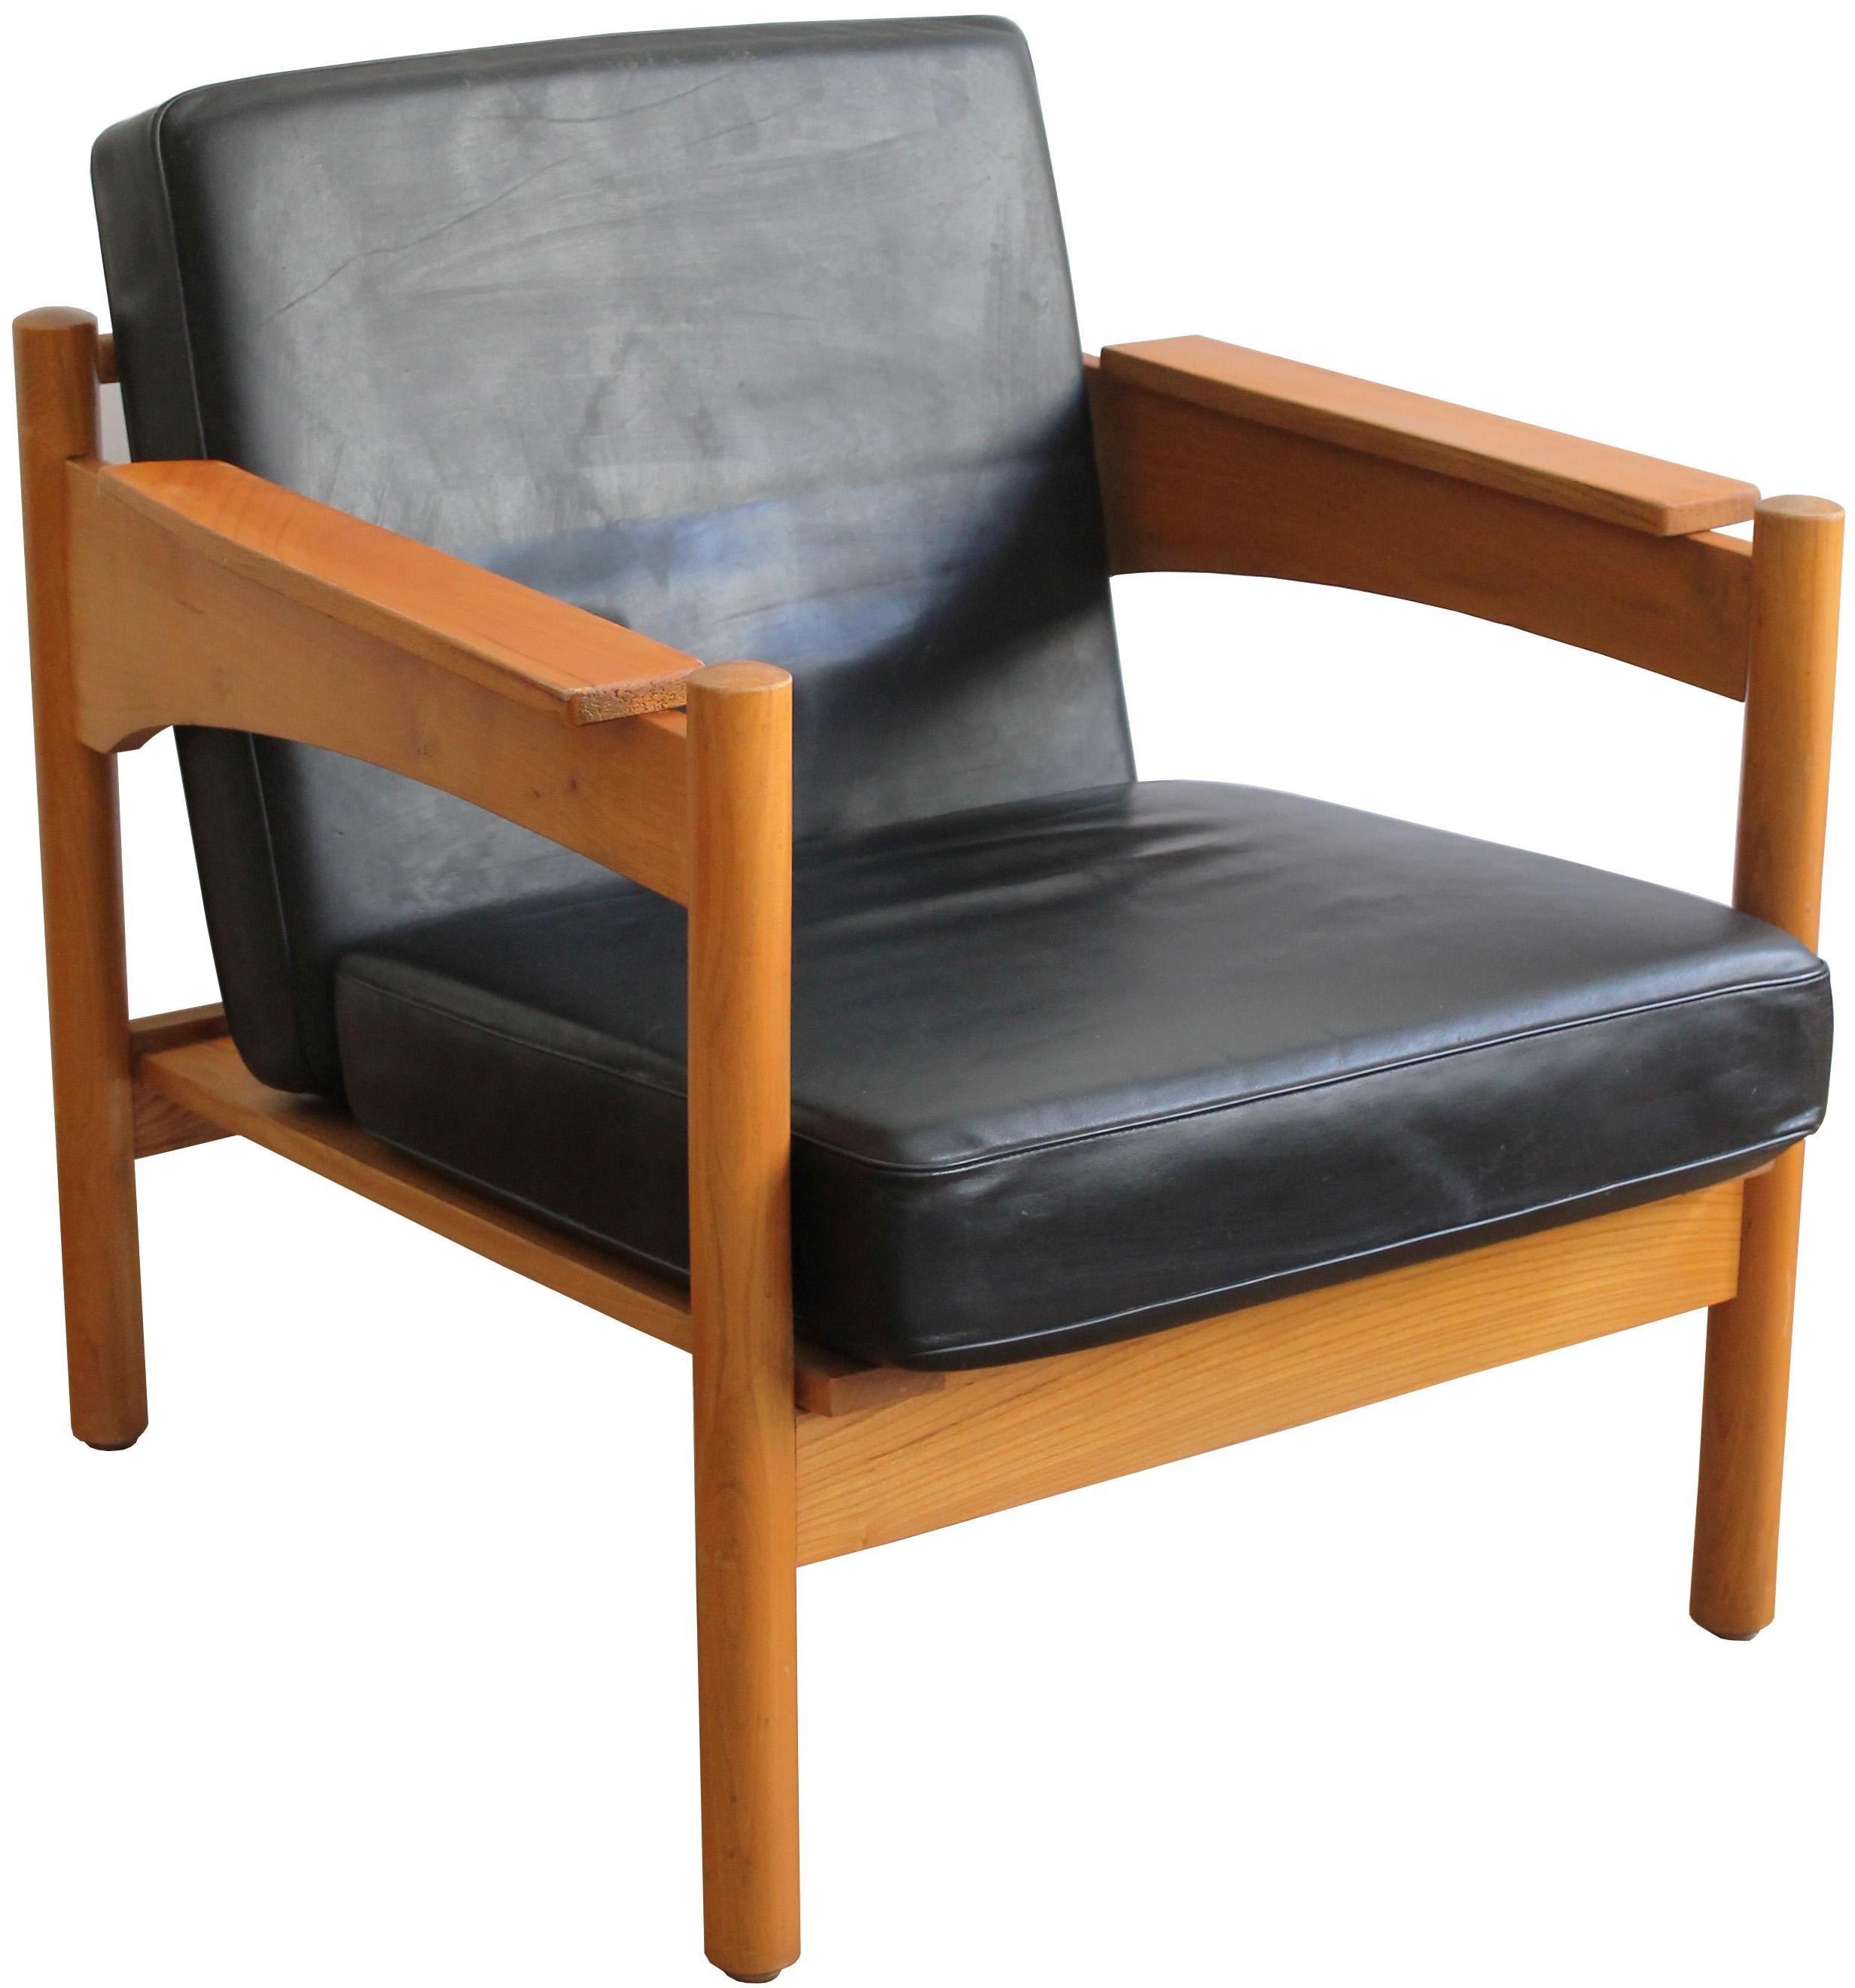 A pair of sleek armchairs from the 1970s.  Made of solid ash, and with its original black leather cushions, these armchairs were made in the Czechoslovakian communist era as luxurious items. It was almost impossible to buy them, they were used